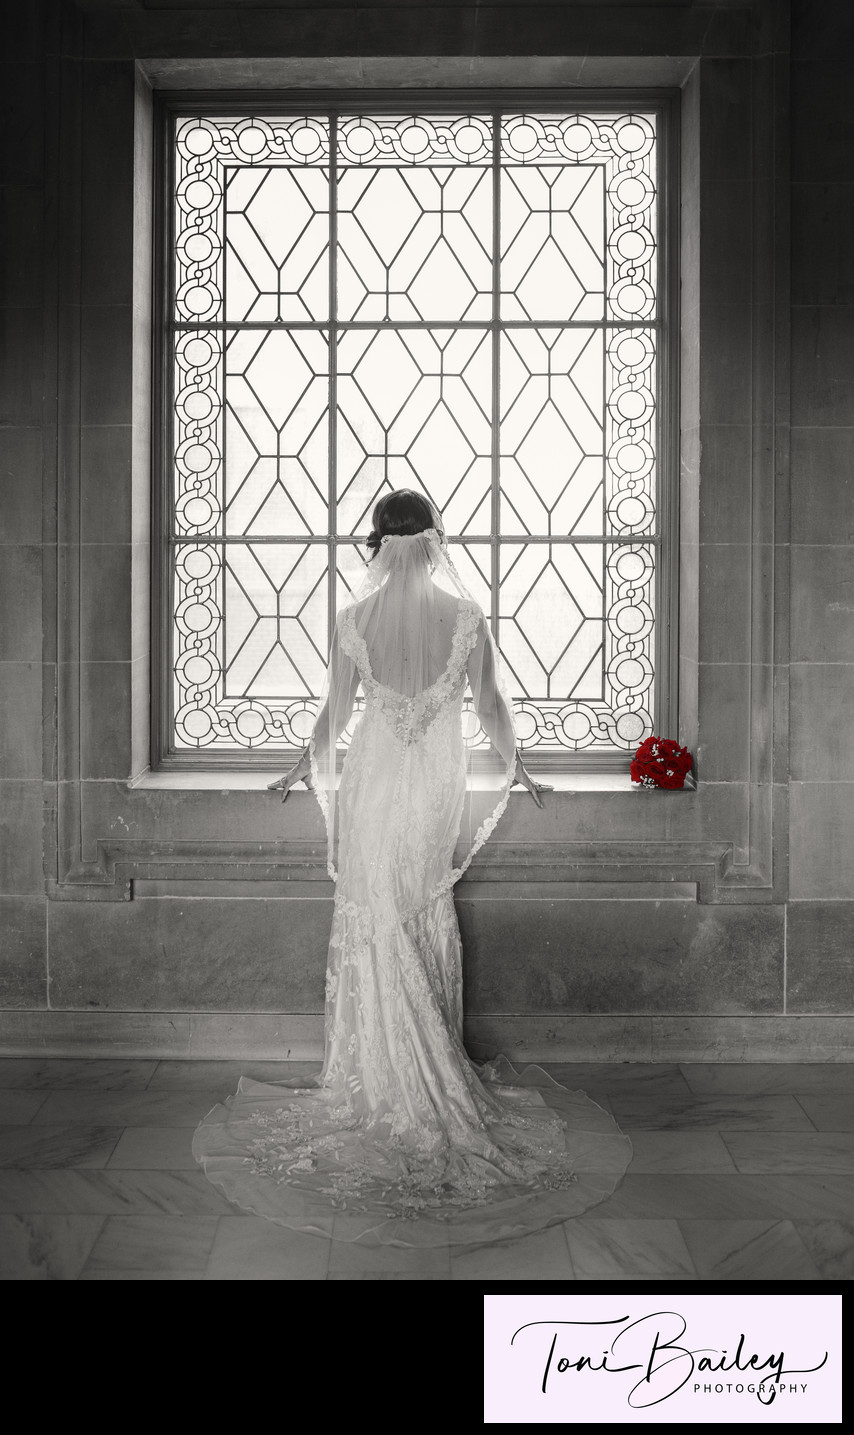 Bride with red roses in window